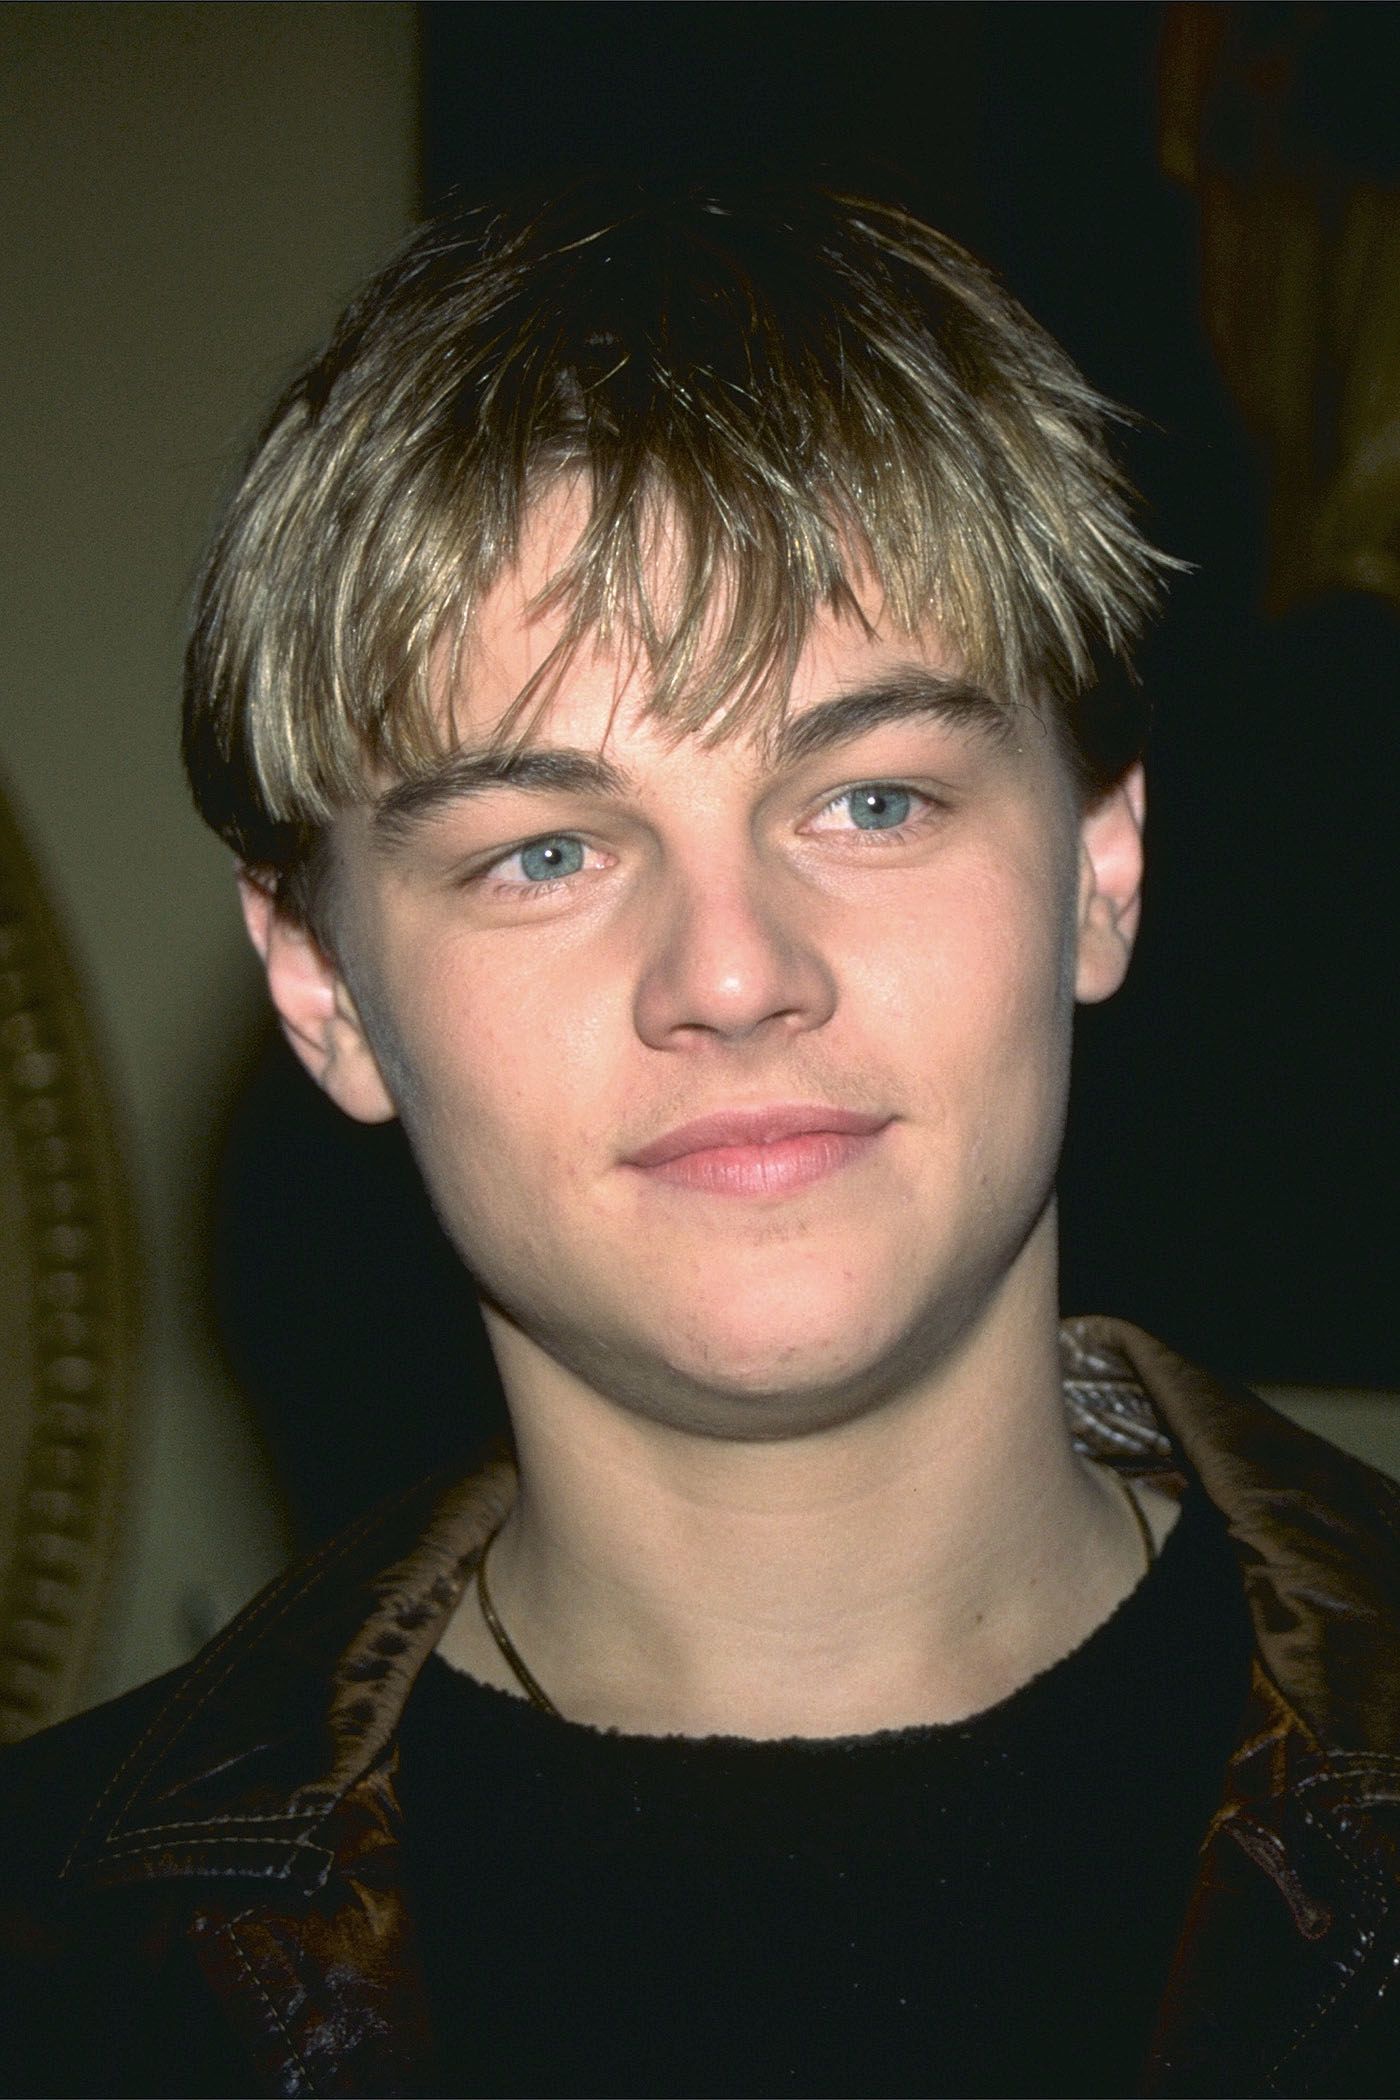 Leonardo DiCaprio Nearly Lost Out On “Titanic” Because He Was “So Negative”